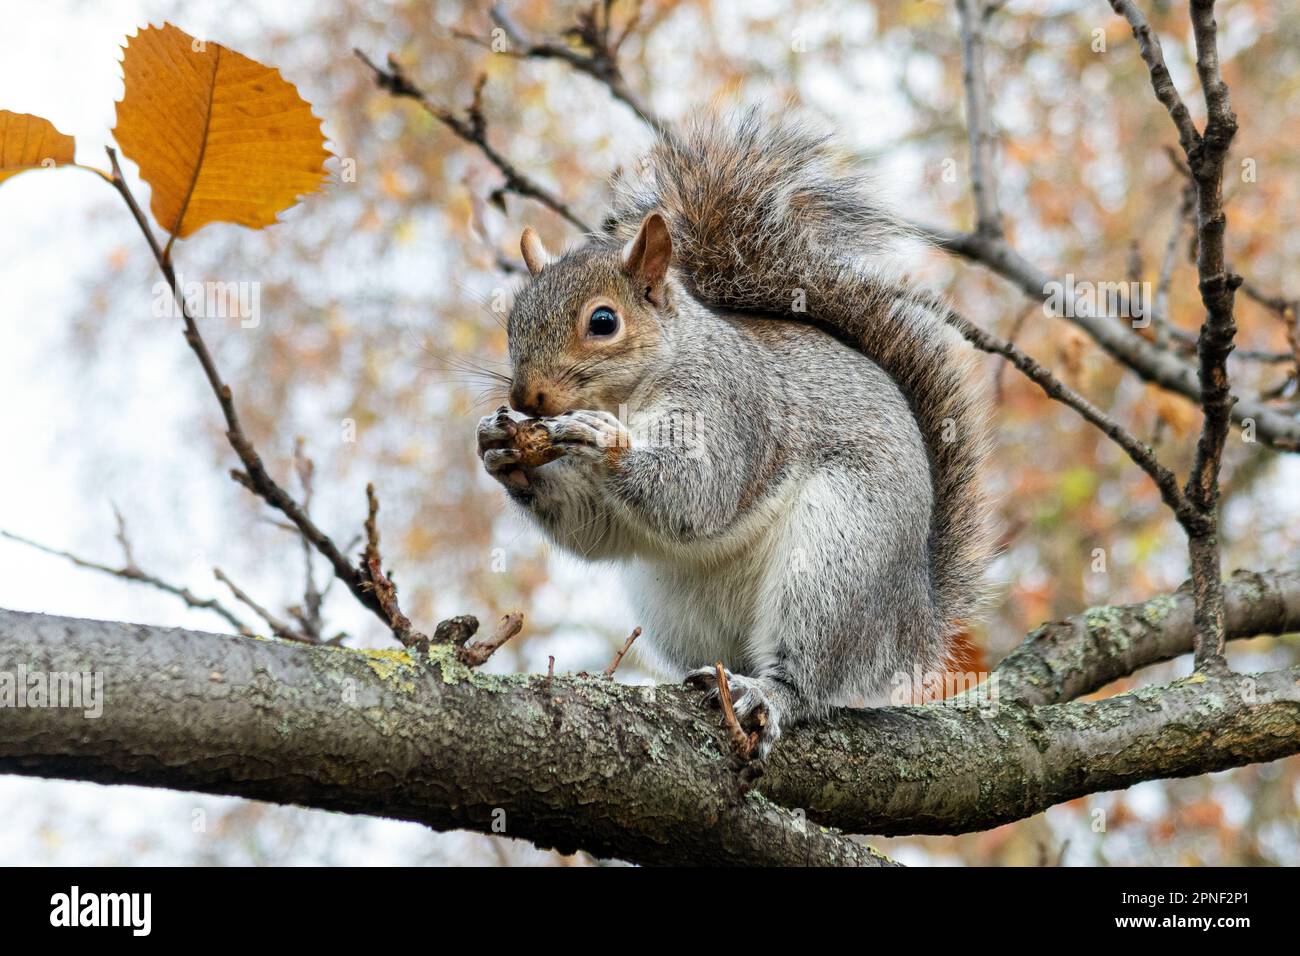 Eastern gray squirrel, Grey squirrel (Sciurus carolinensis), sits in a tree in St James's Park and eating a nut, side view, United Kingdom, England, Stock Photo